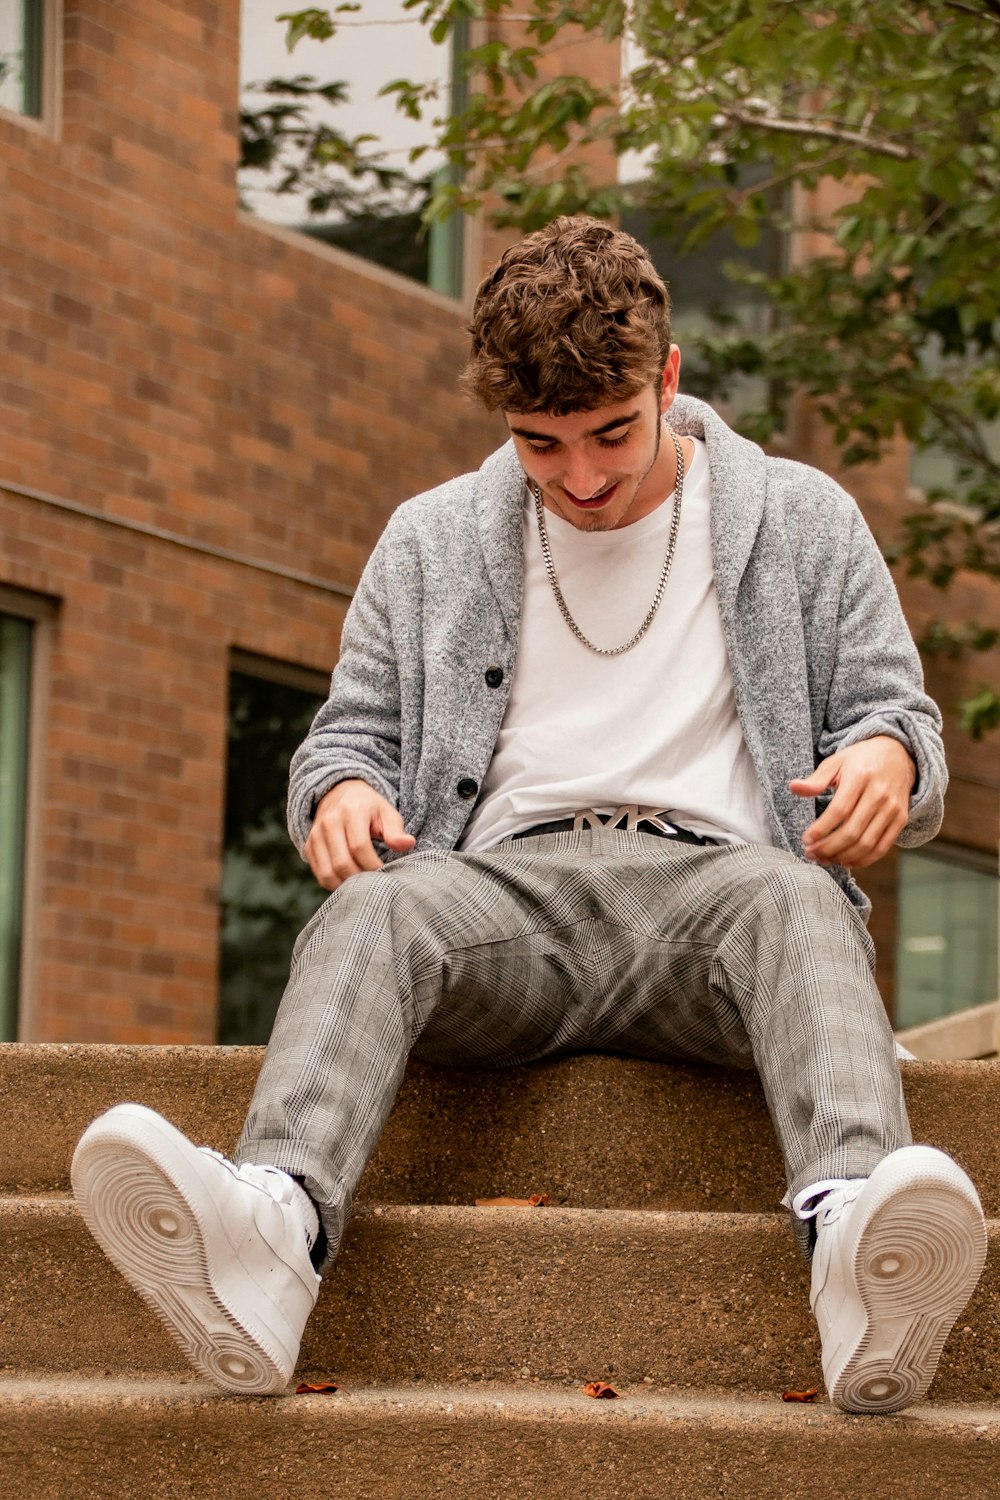 Man in gray sweater and gray pants sitting on brown concrete bench during  daytime photo – Free Clothing Image on Unsplash